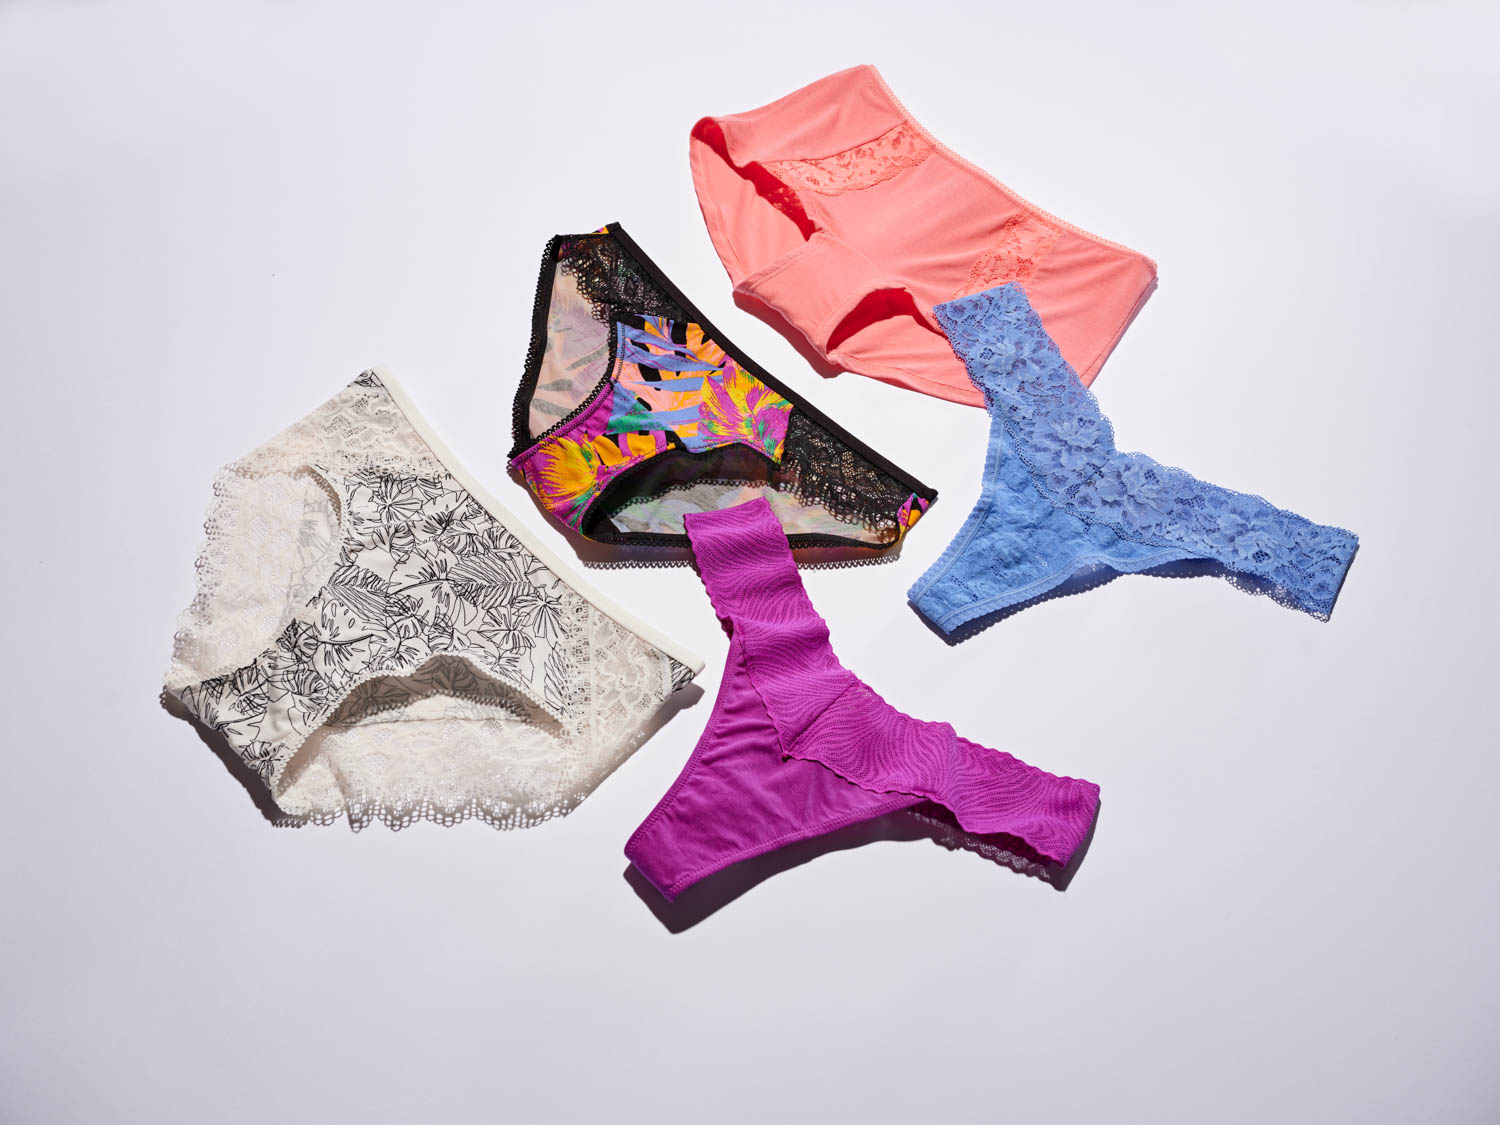 What Is The Pocket In Panties For? – WAMA Underwear